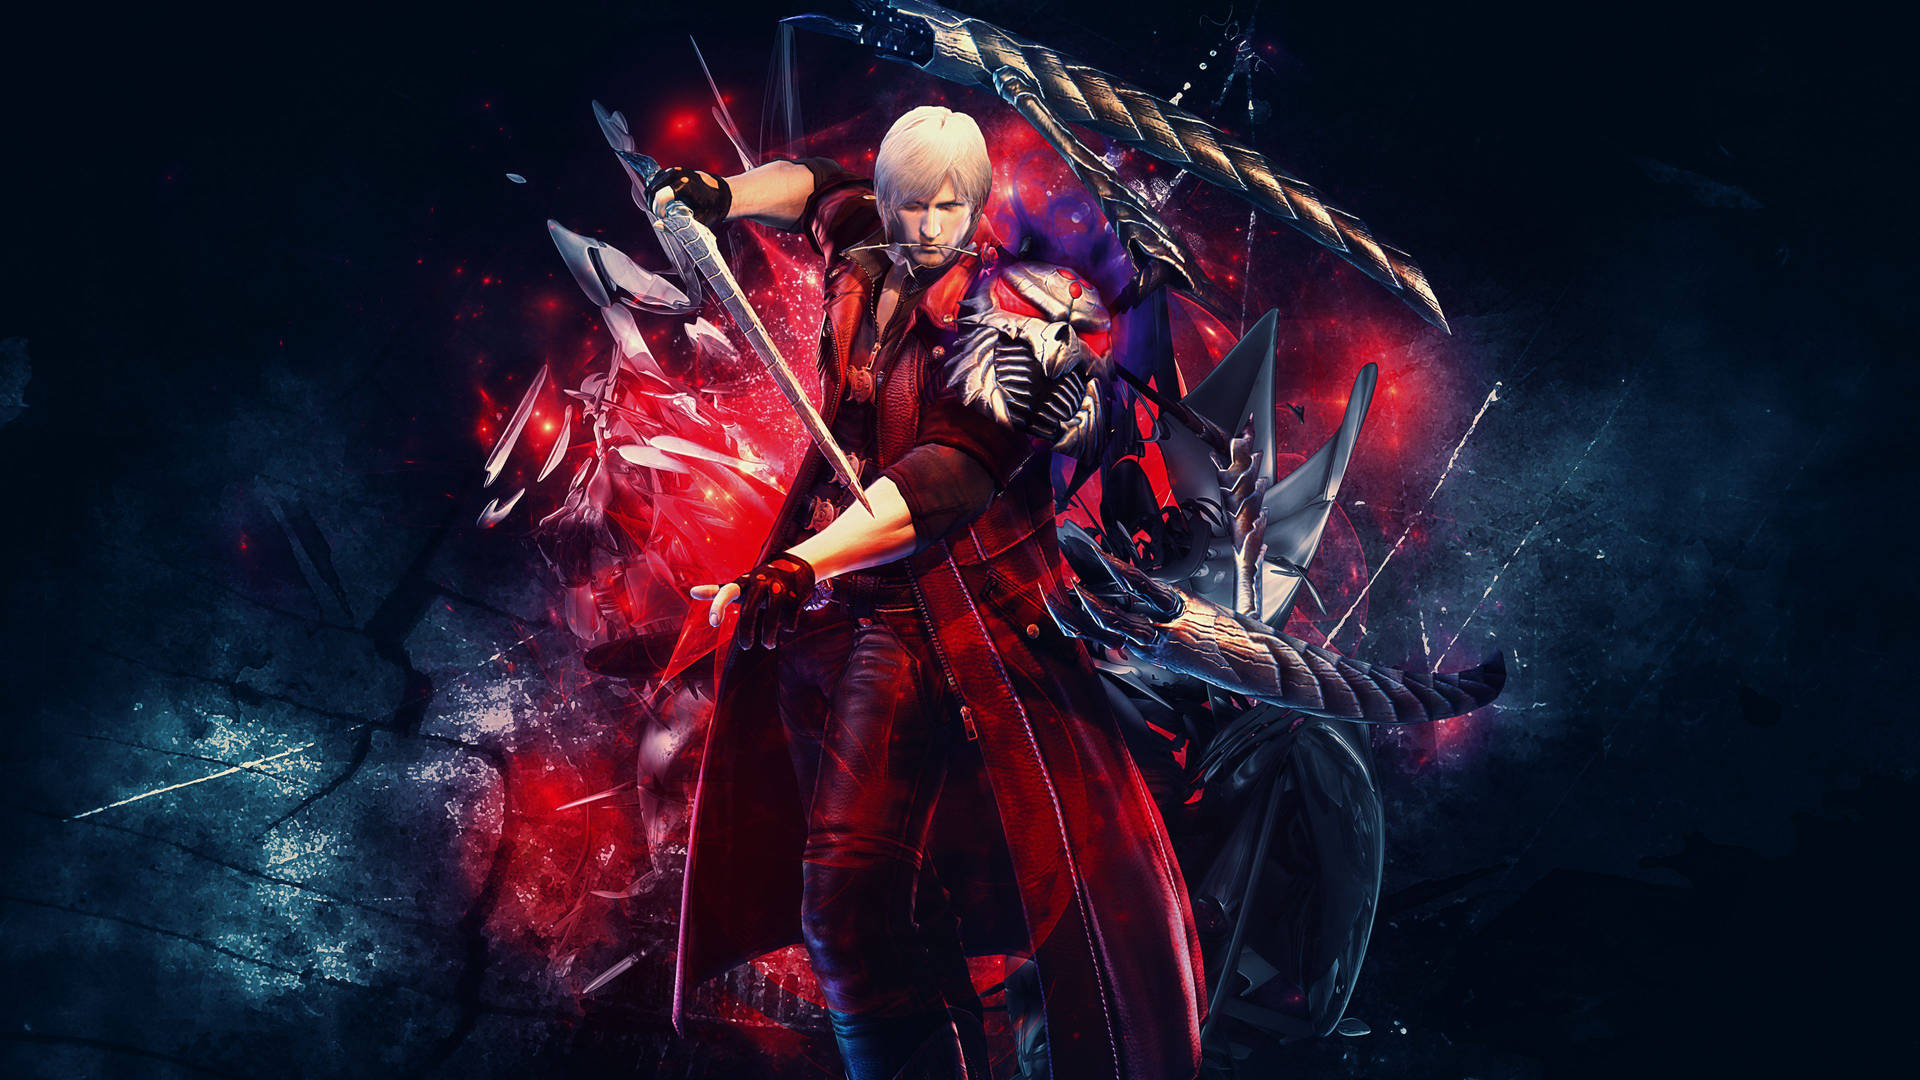 Devil May Cry Dante Sword Stance Background